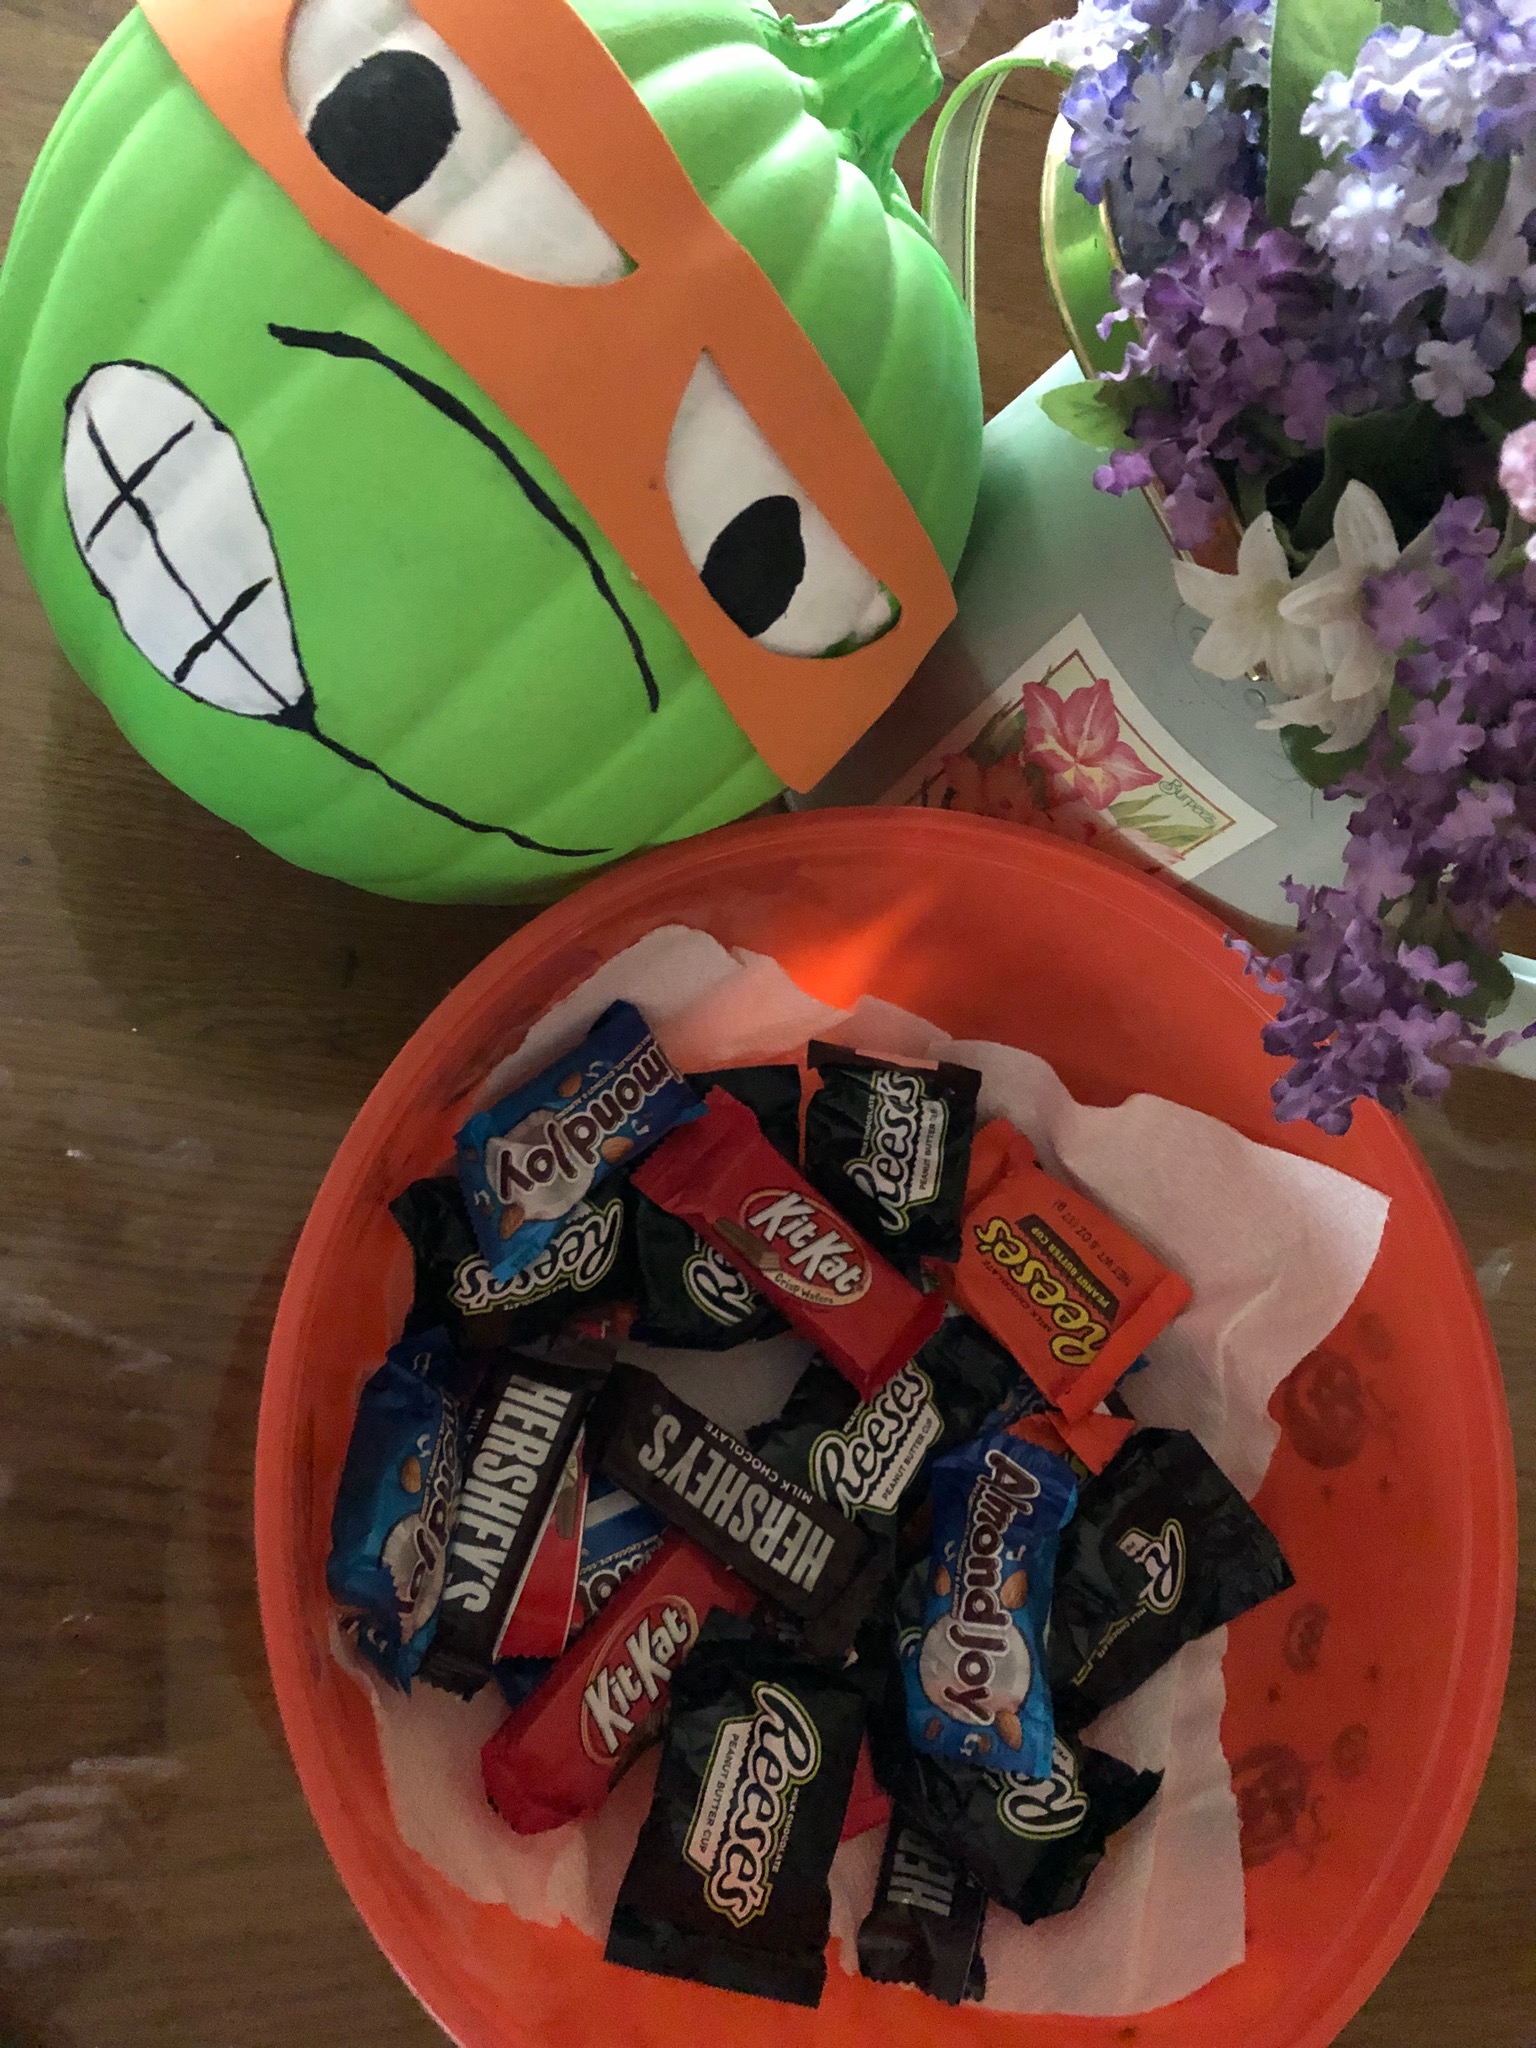 IMG_5199.jpg Halloween candy NAPS 2 B Fit October 2018